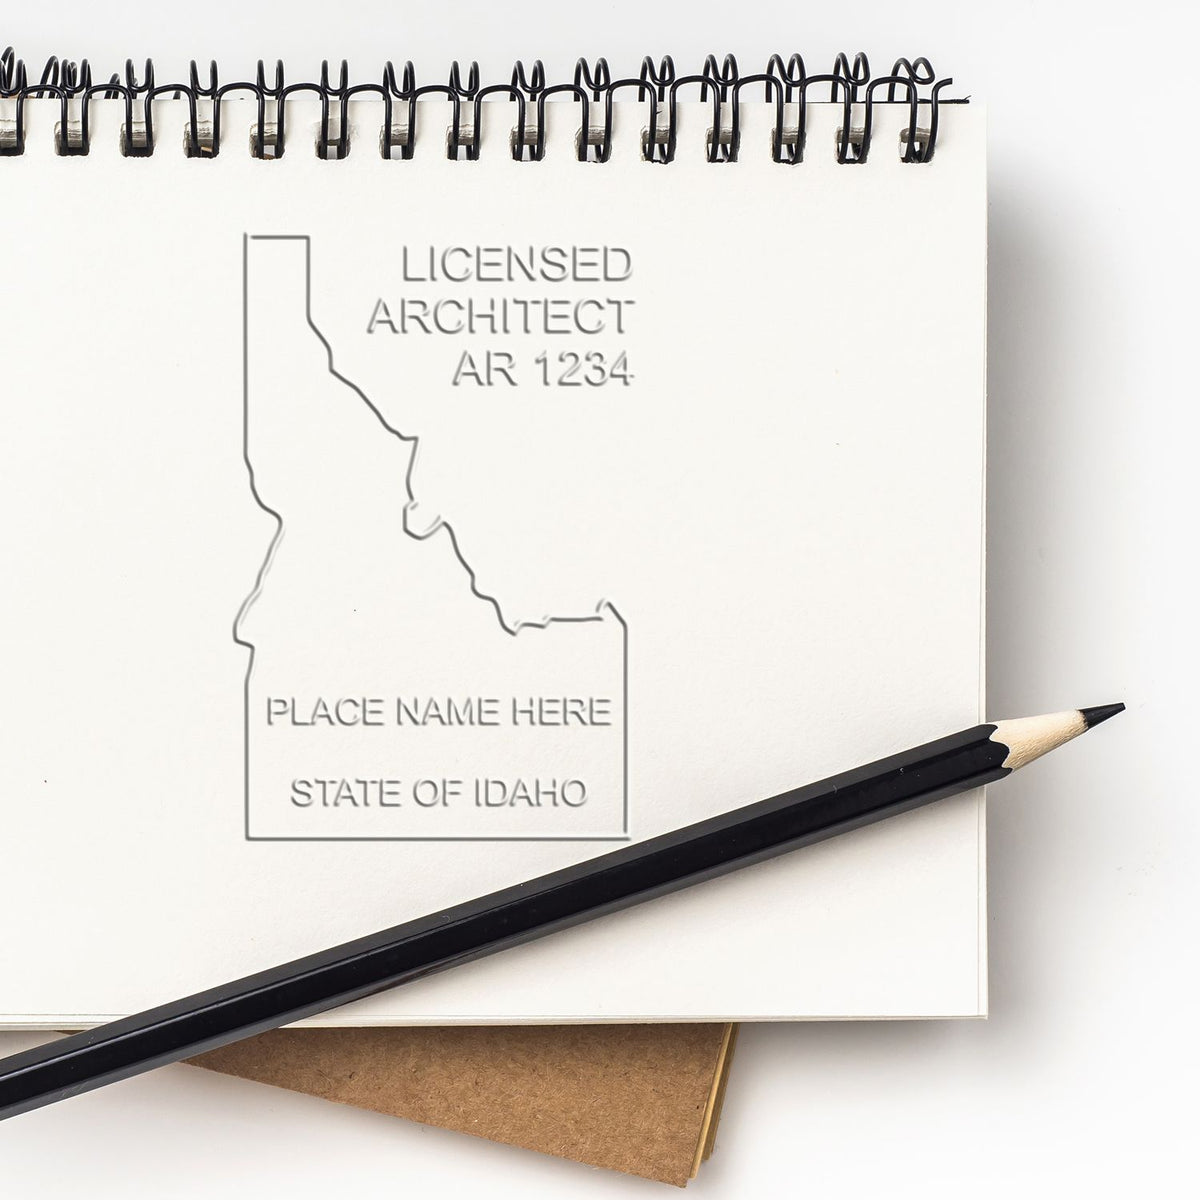 The Idaho Desk Architect Embossing Seal stamp impression comes to life with a crisp, detailed photo on paper - showcasing true professional quality.